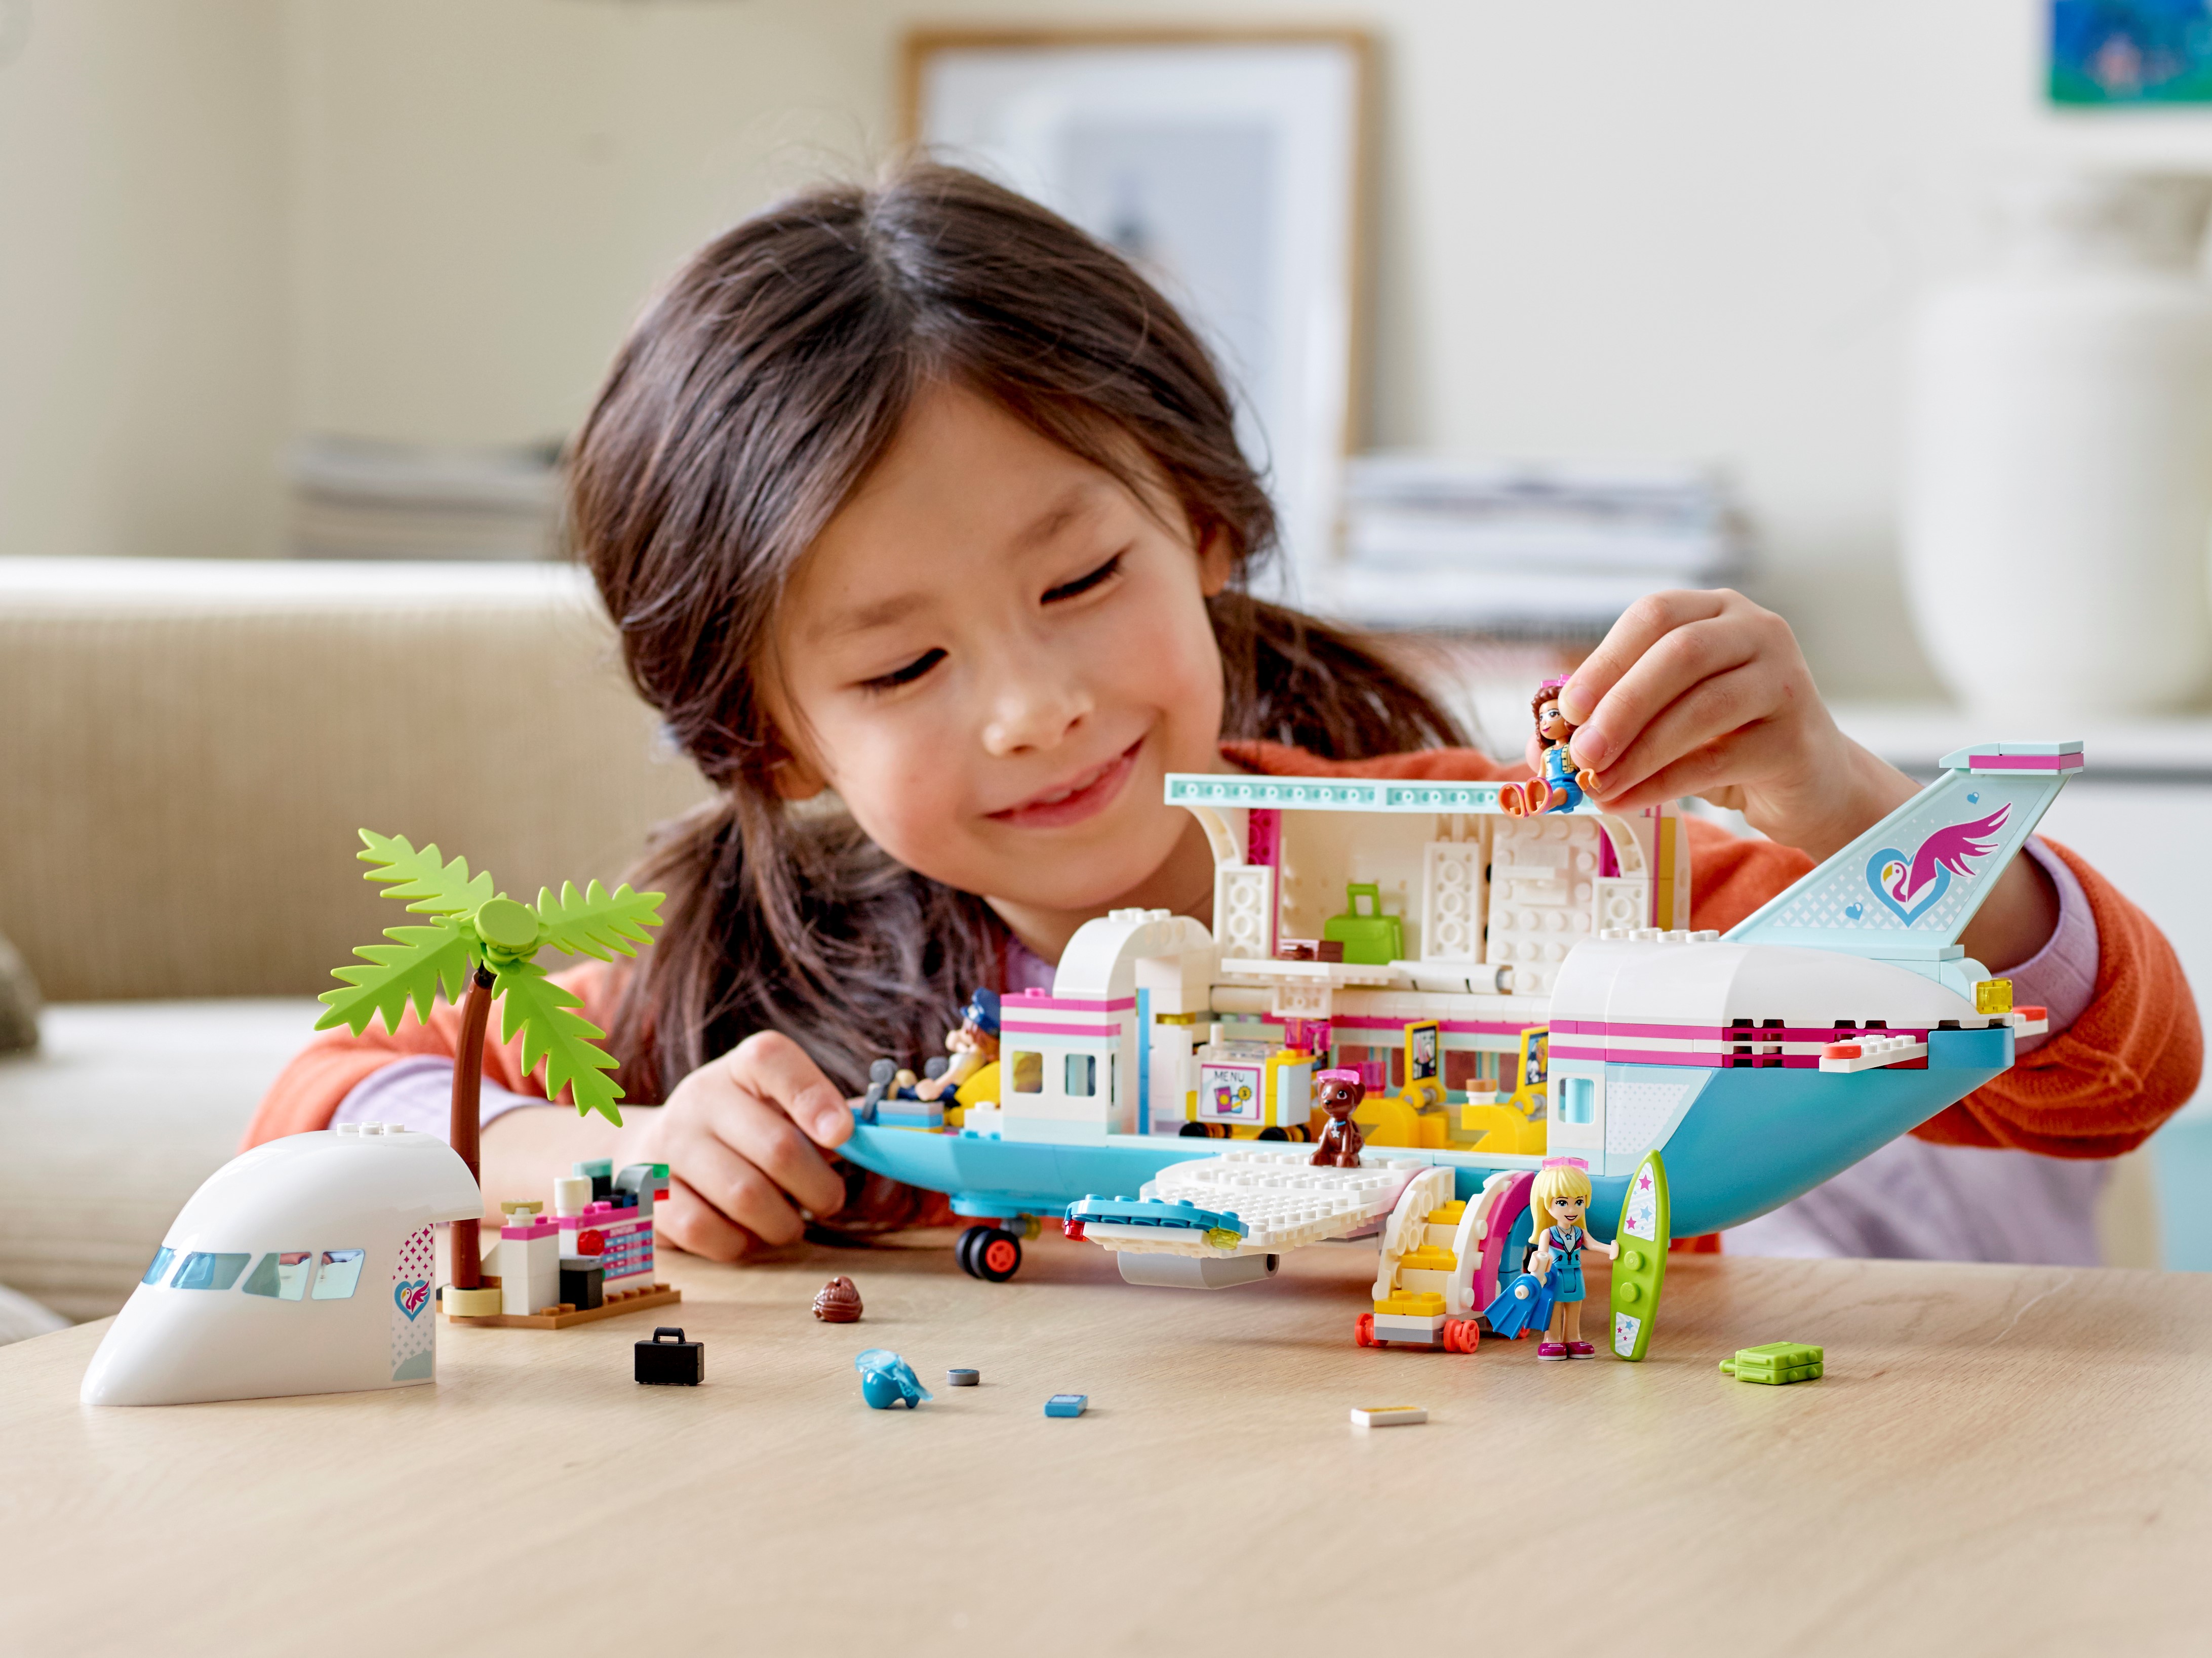 41429 for sale online LEGO Heartlake City Airplane LEGO Friends